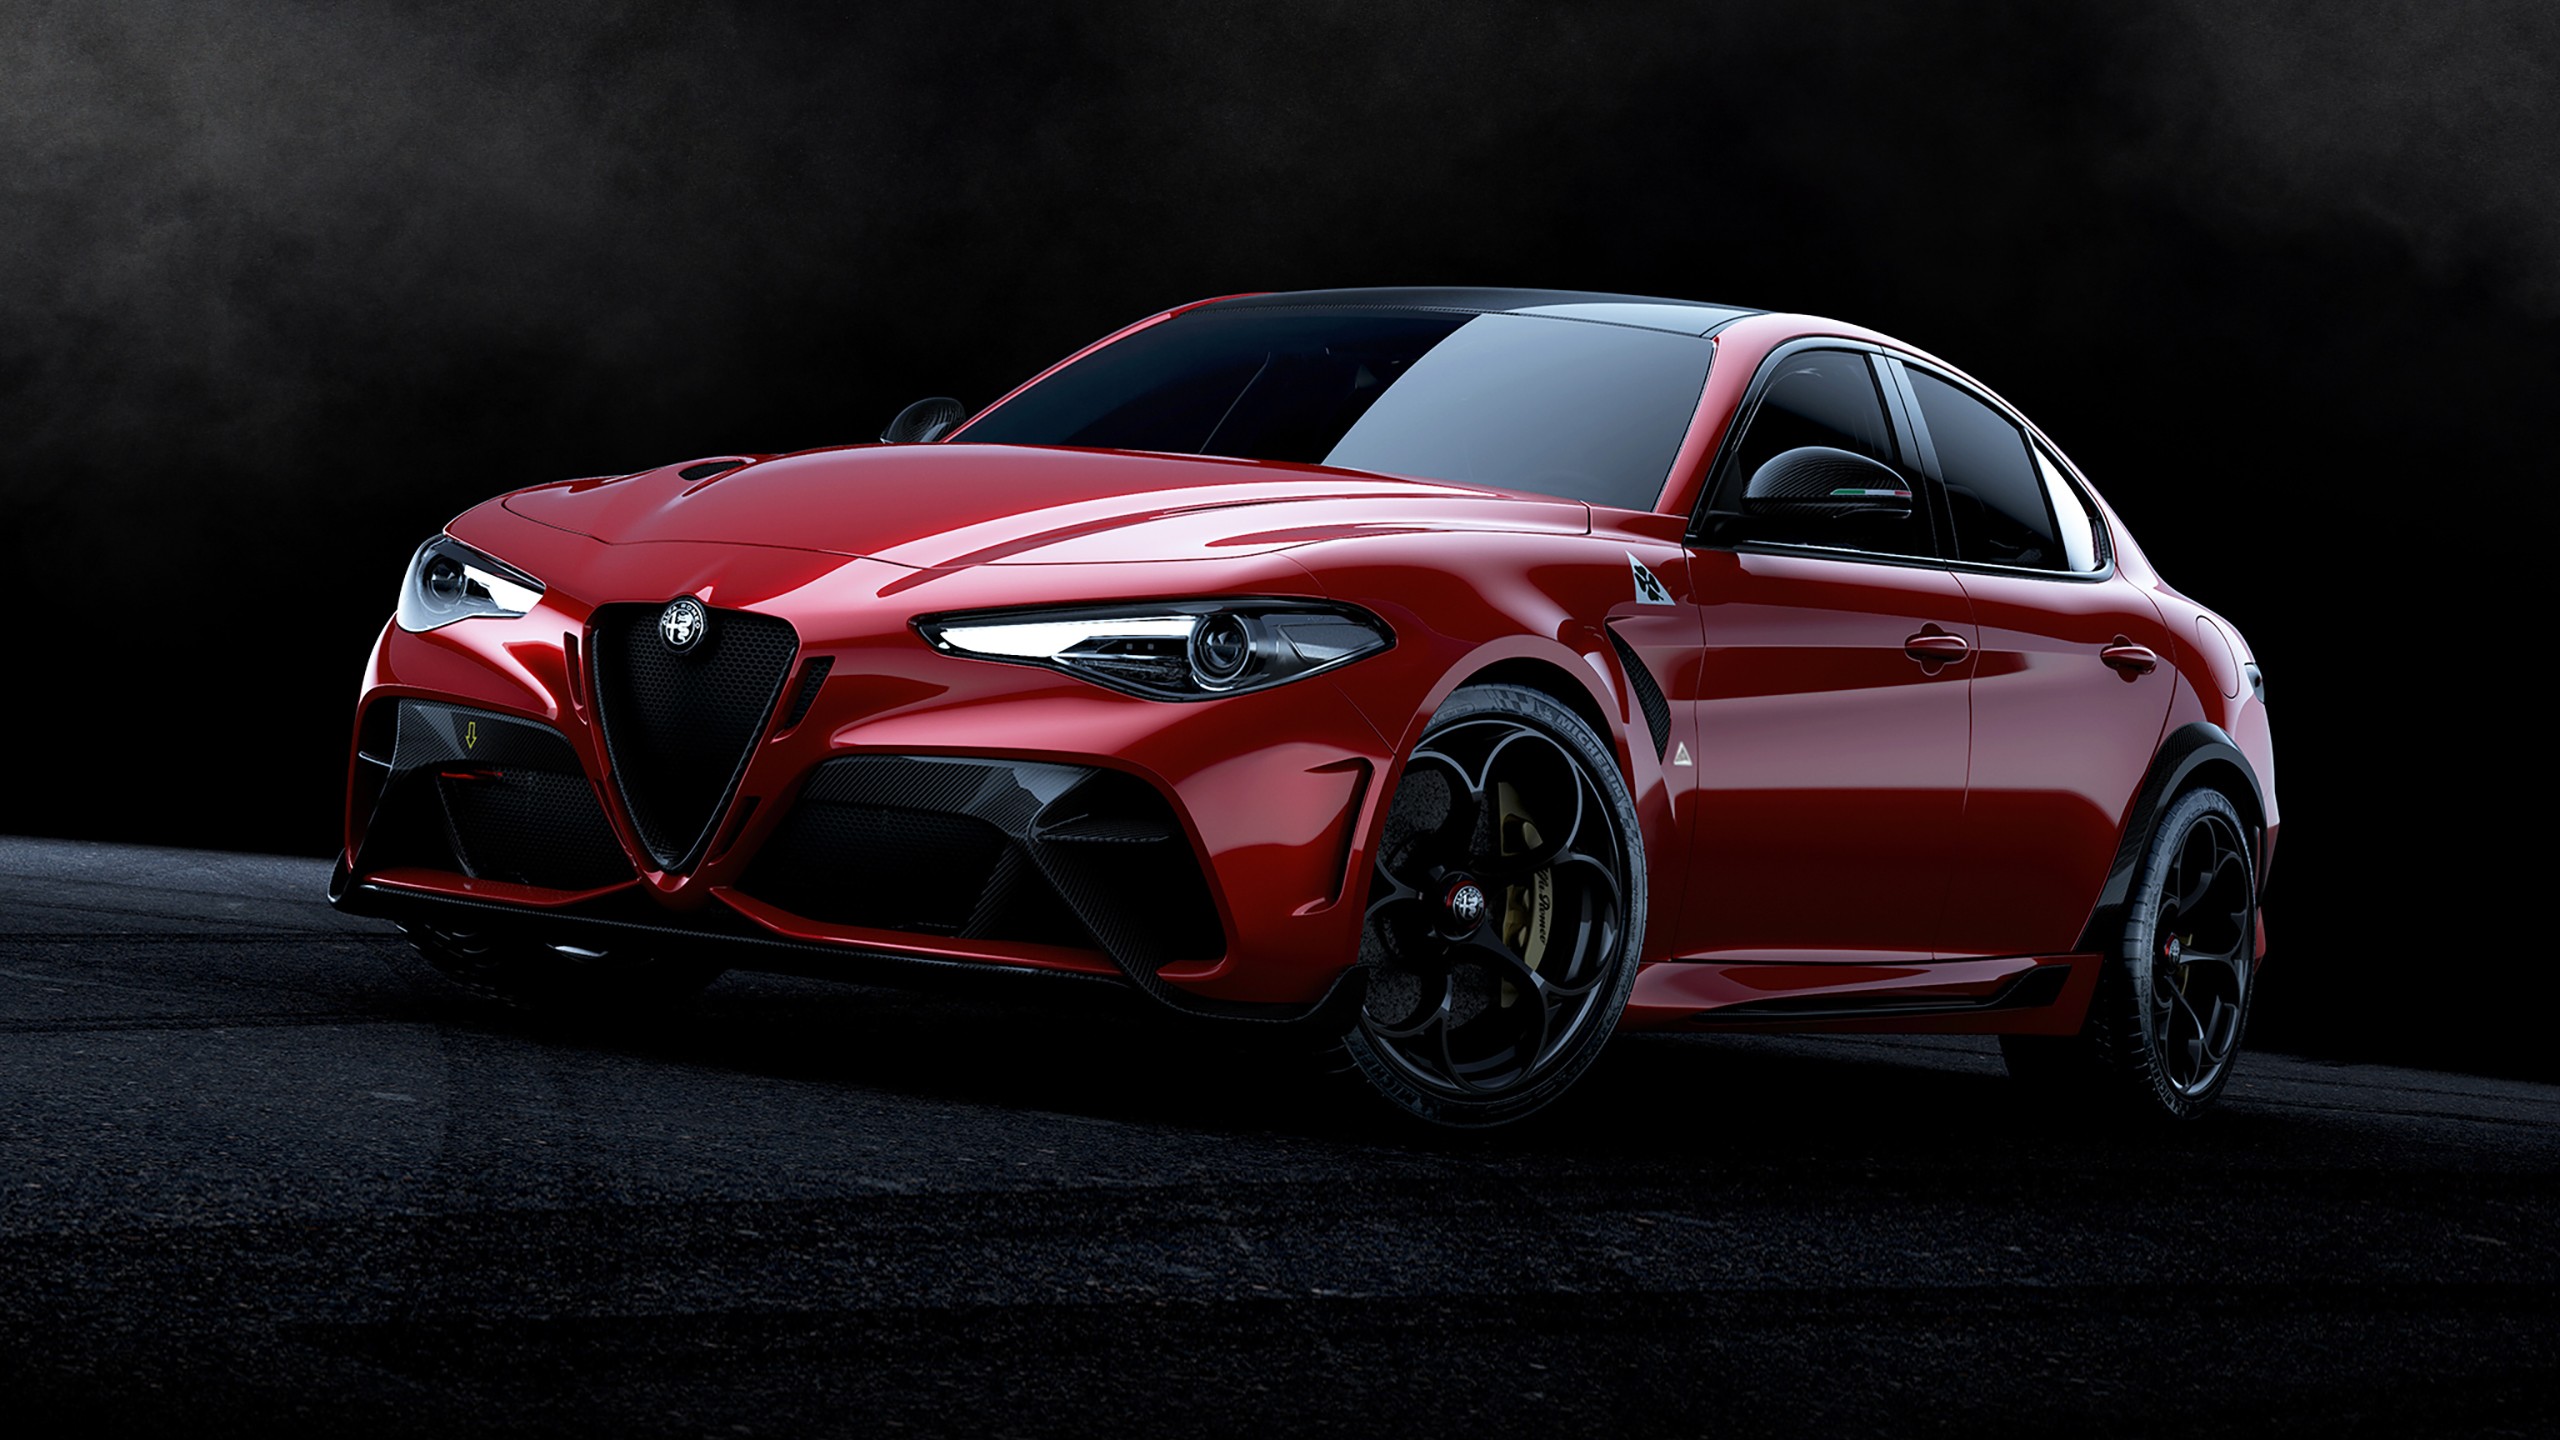 Red Car Alfa Romeo Giulia Gta 2020 On A Black Background Wallpapers And Images Wallpapers Pictures Photos